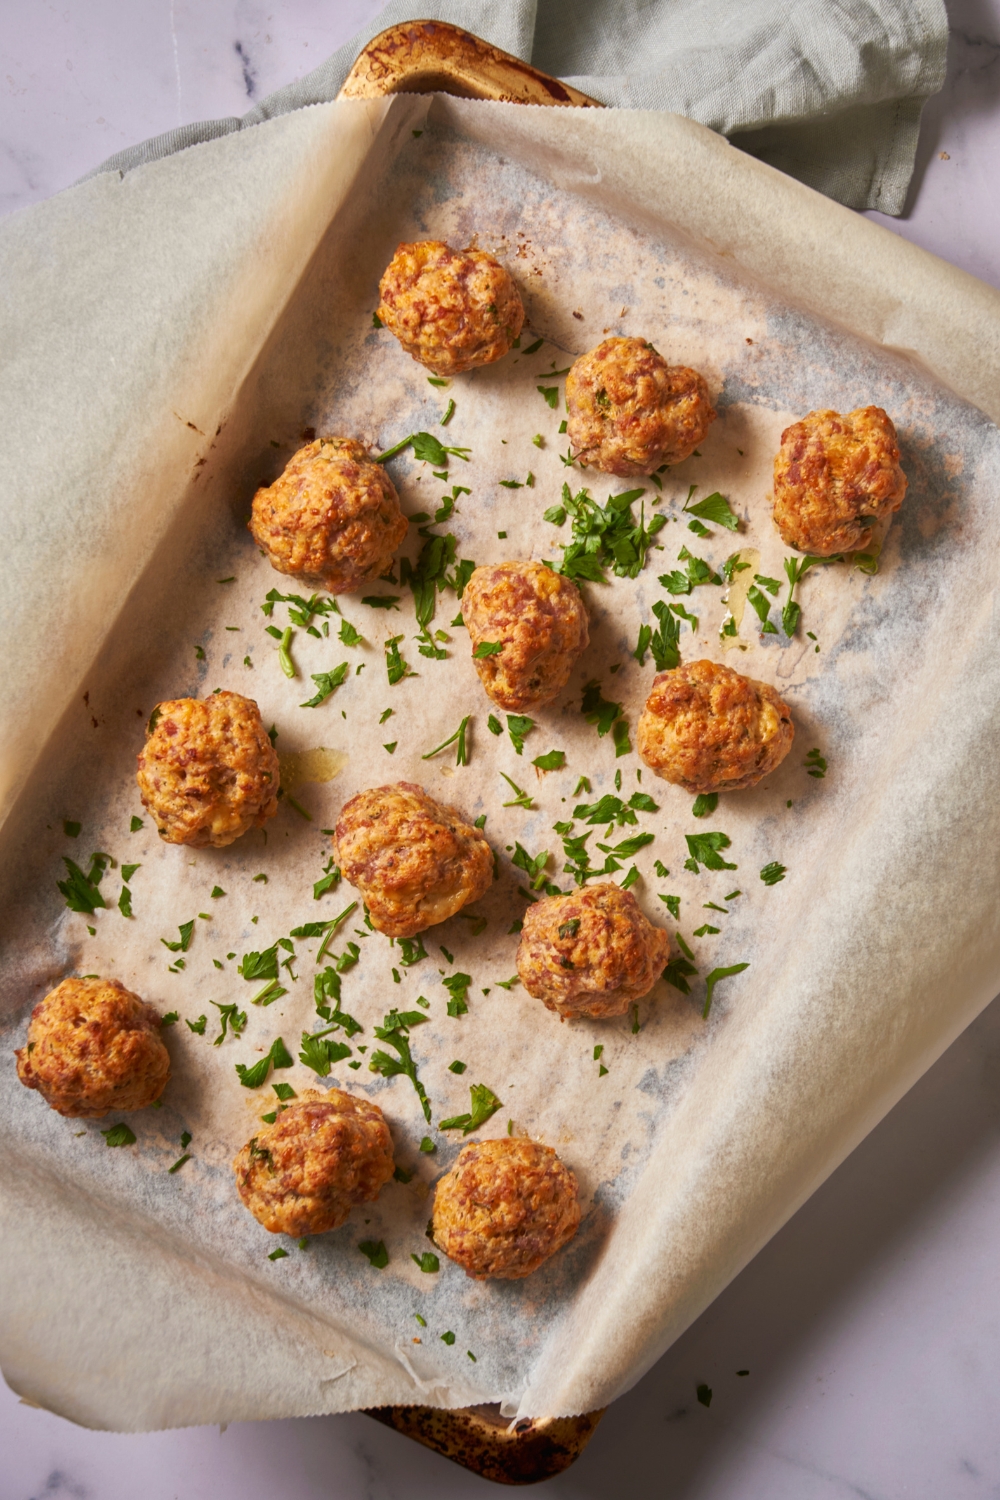 Baking sheet lined with parchment paper with freshly baked sausage balls topped with fresh parsley.